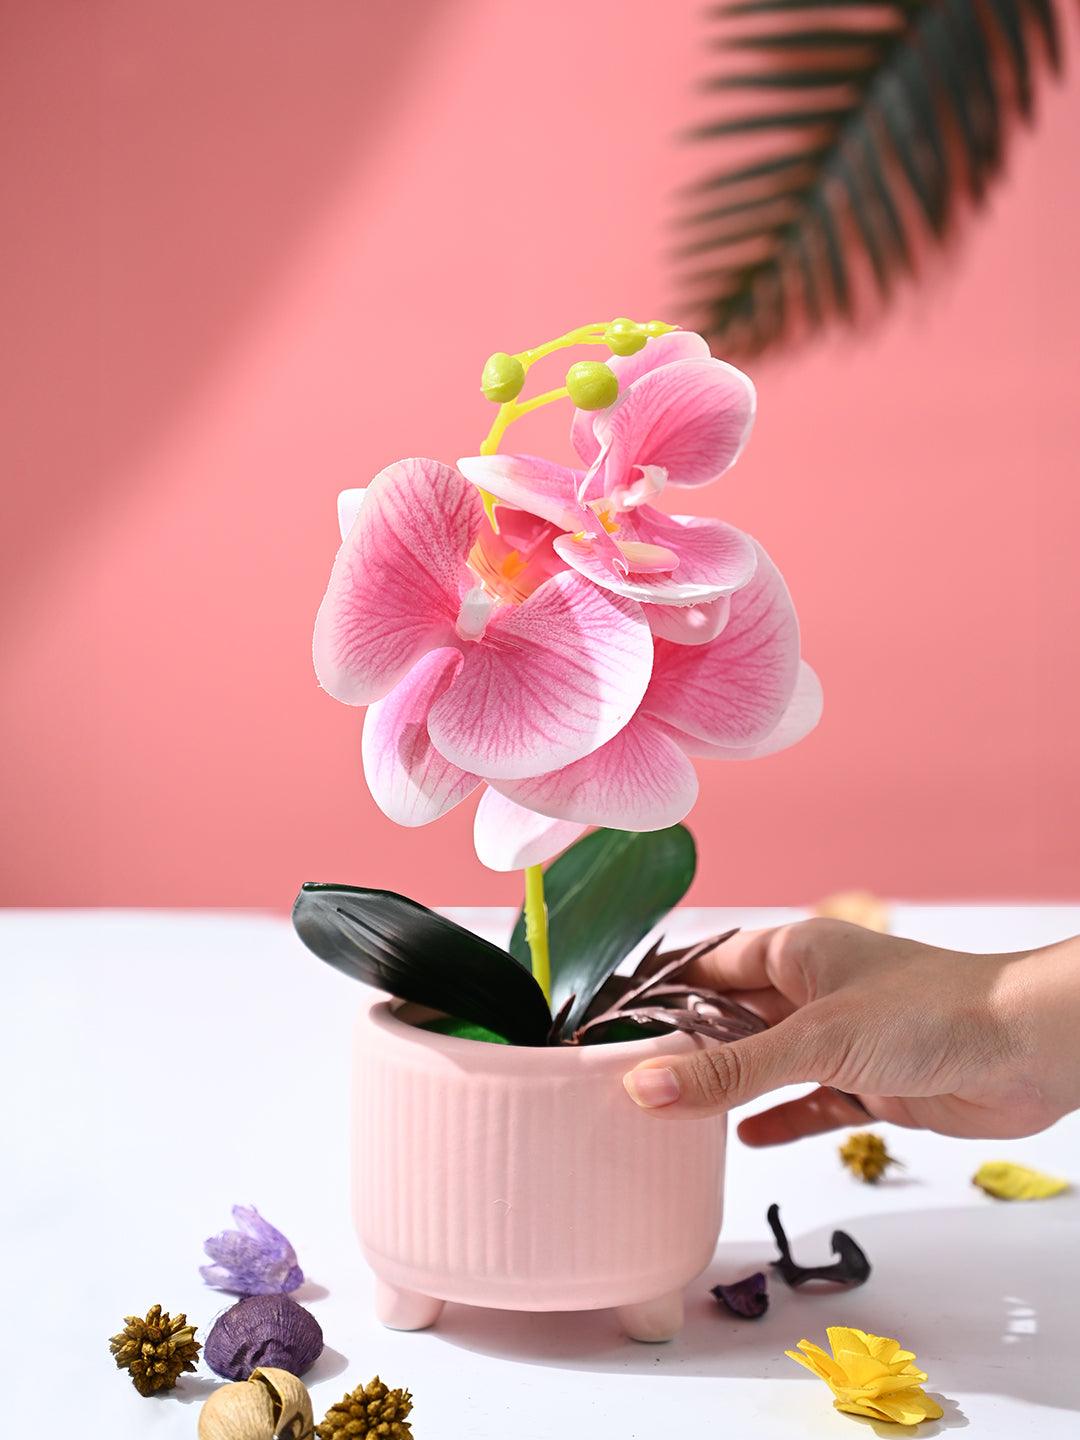 Orchid Flowers With Peach Pot